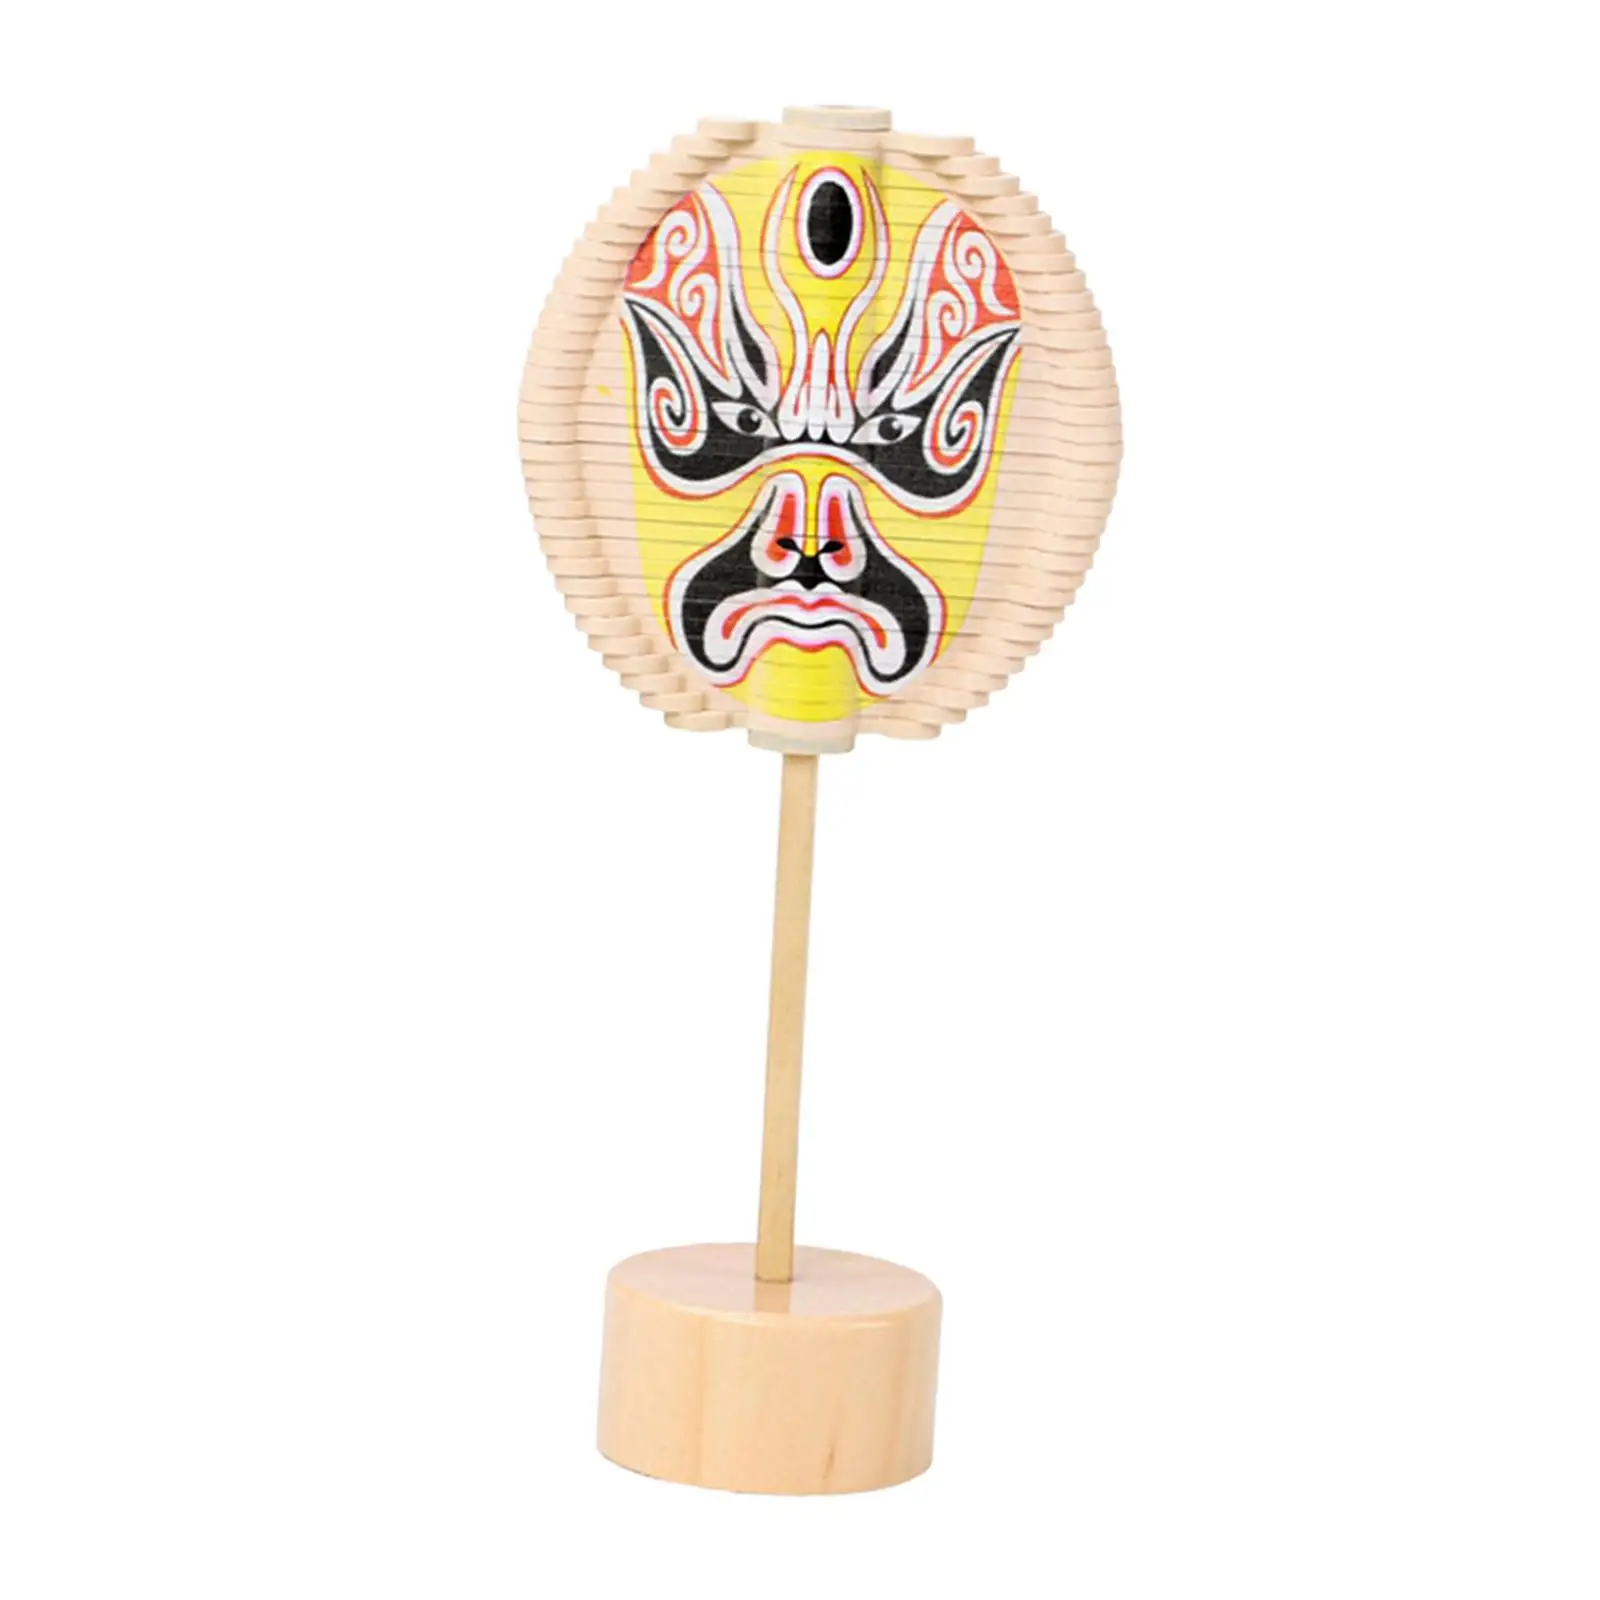 Face Changing Rotating Lollipop Desktop Ornaments Vent Toys Gadget Sensory Toy Wooden Rotary Spiral Lollipop for Exercise Office